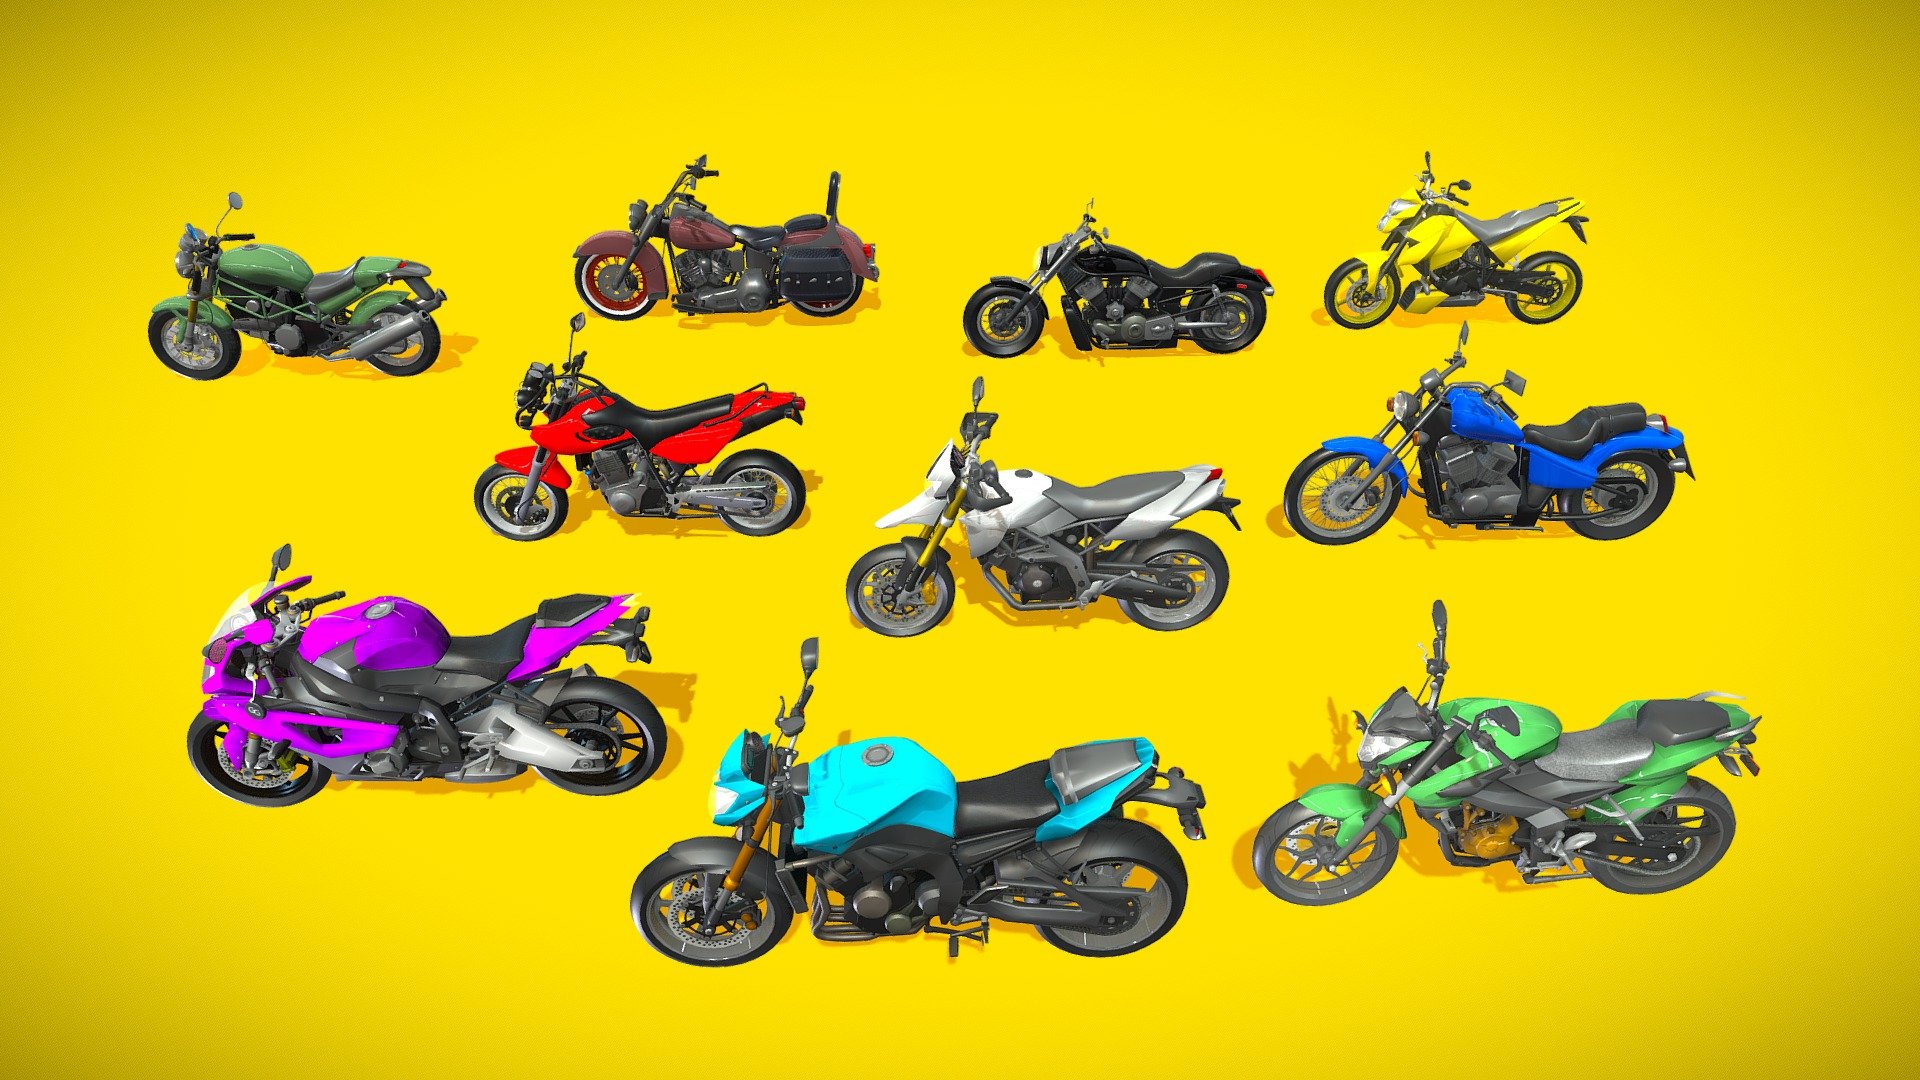 Rev up your game with our Low Poly 10 SUPER Bikes Pack! These sleek and stylish 3D models are perfect for adding a dose of adrenaline to your mobile or low-poly game project. Each bike is meticulously crafted, rigged, and ready for action, making it easy to integrate them seamlessly into your game.

Technical Details:

Texture dimensions: 1024px, 512px

Number of models: 10

Rigged: Yes

UV mapping: Yes

Polygon Counts:

Bike01: Polys 26k - Verts 14k

Bike02: Polys 34k - Verts 19k

Bike03: Polys 39k - Verts 20k

Bike04: Polys 29k - Verts 16k

Bike05: Polys 35k - Verts 20k

Bike06: Polys 33k - Verts 18k

Bike07: Polys 37k - Verts 19k

Bike08: Polys 33k - Verts 19k

Bike09: Polys 39k - Verts 20k

Bike10: Polys 39k - Verts 21k

Whether you're creating a racing game, an open-world adventure, or simply want to add some two-wheeled excitement to your project, the Low Poly 10 SUPER Bikes Pack is your ticket to a thrilling ride. Get ready to hit the virtual road like never before 3d model